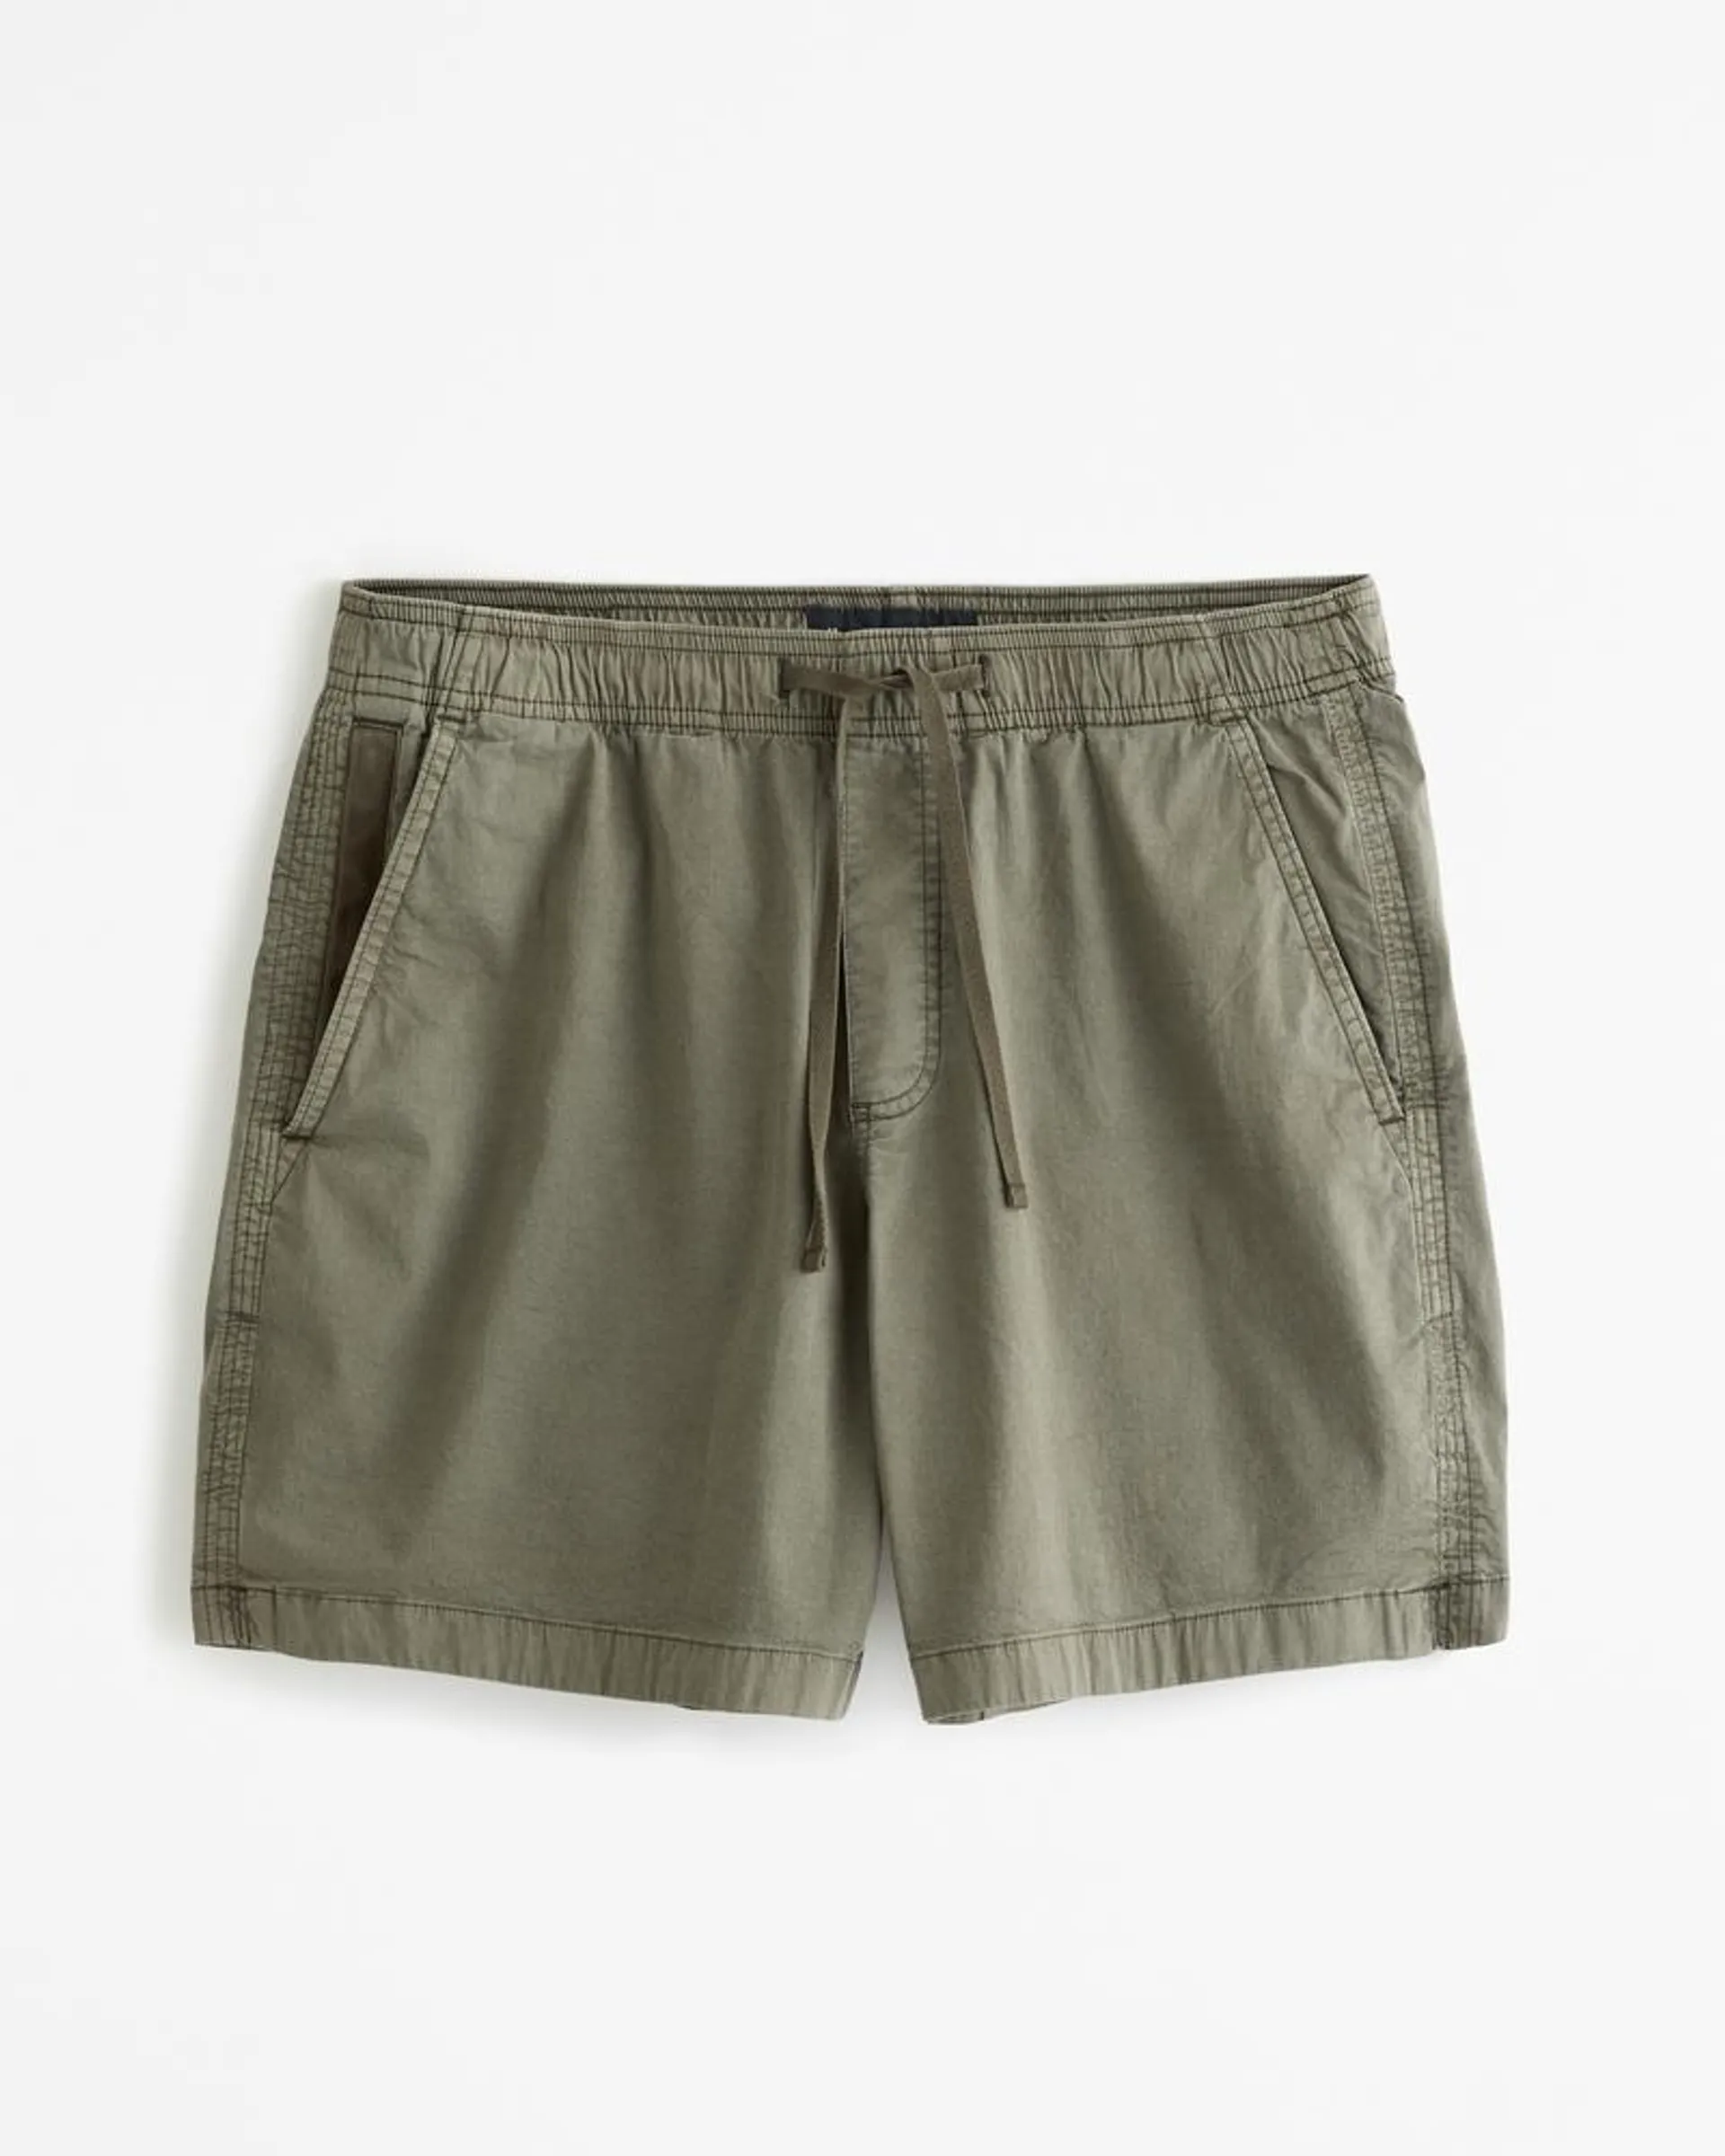 A&F All-Day Pull-On Short